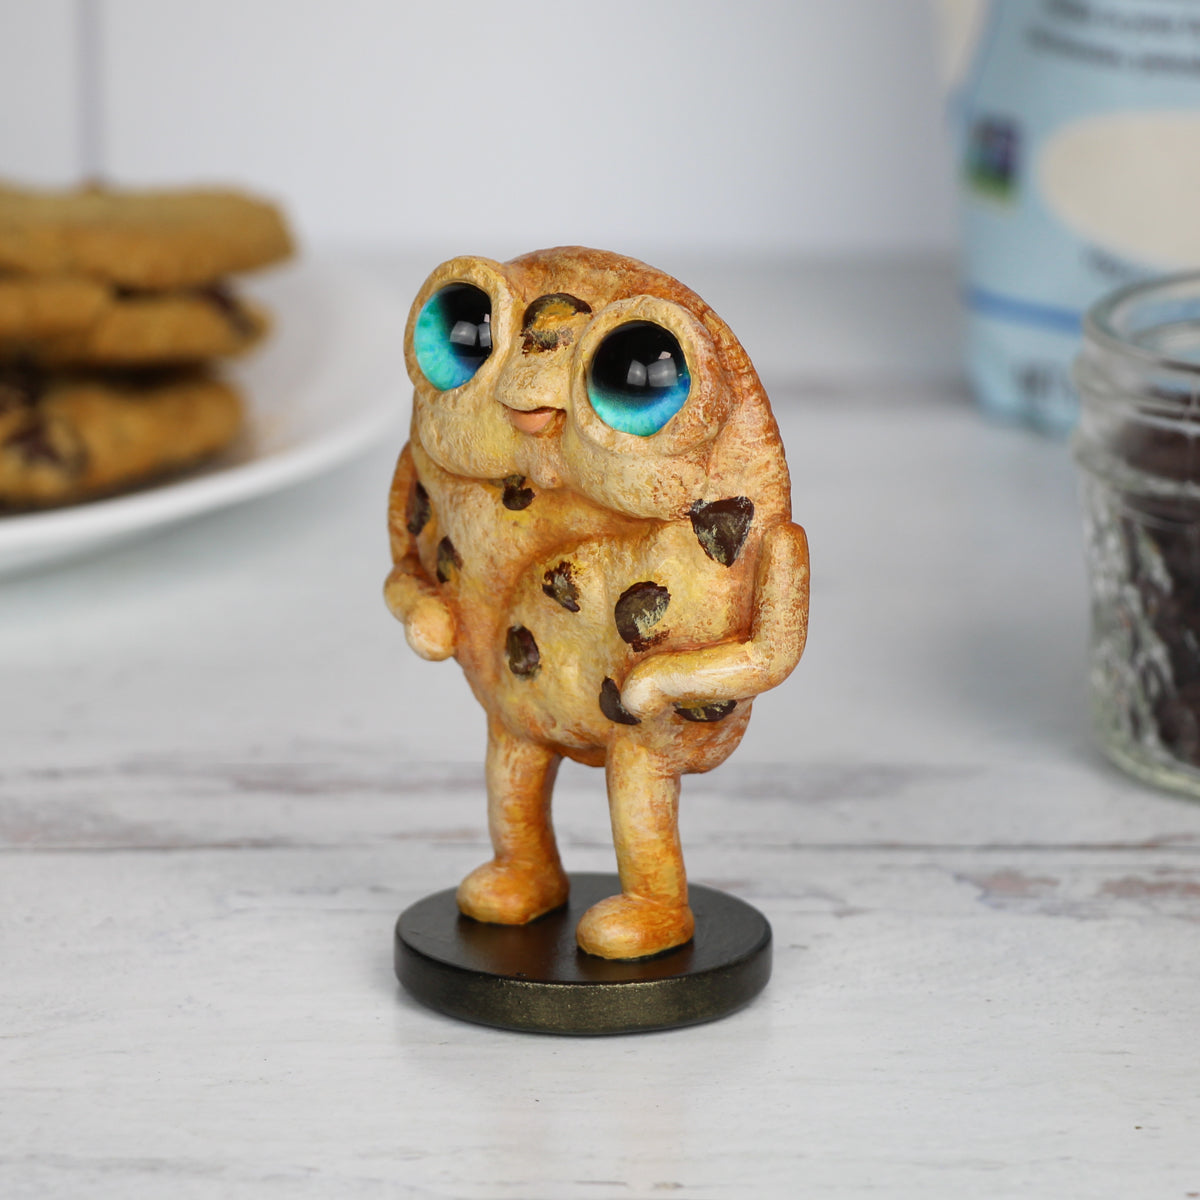 Scrumpy the Enchanted Cookie